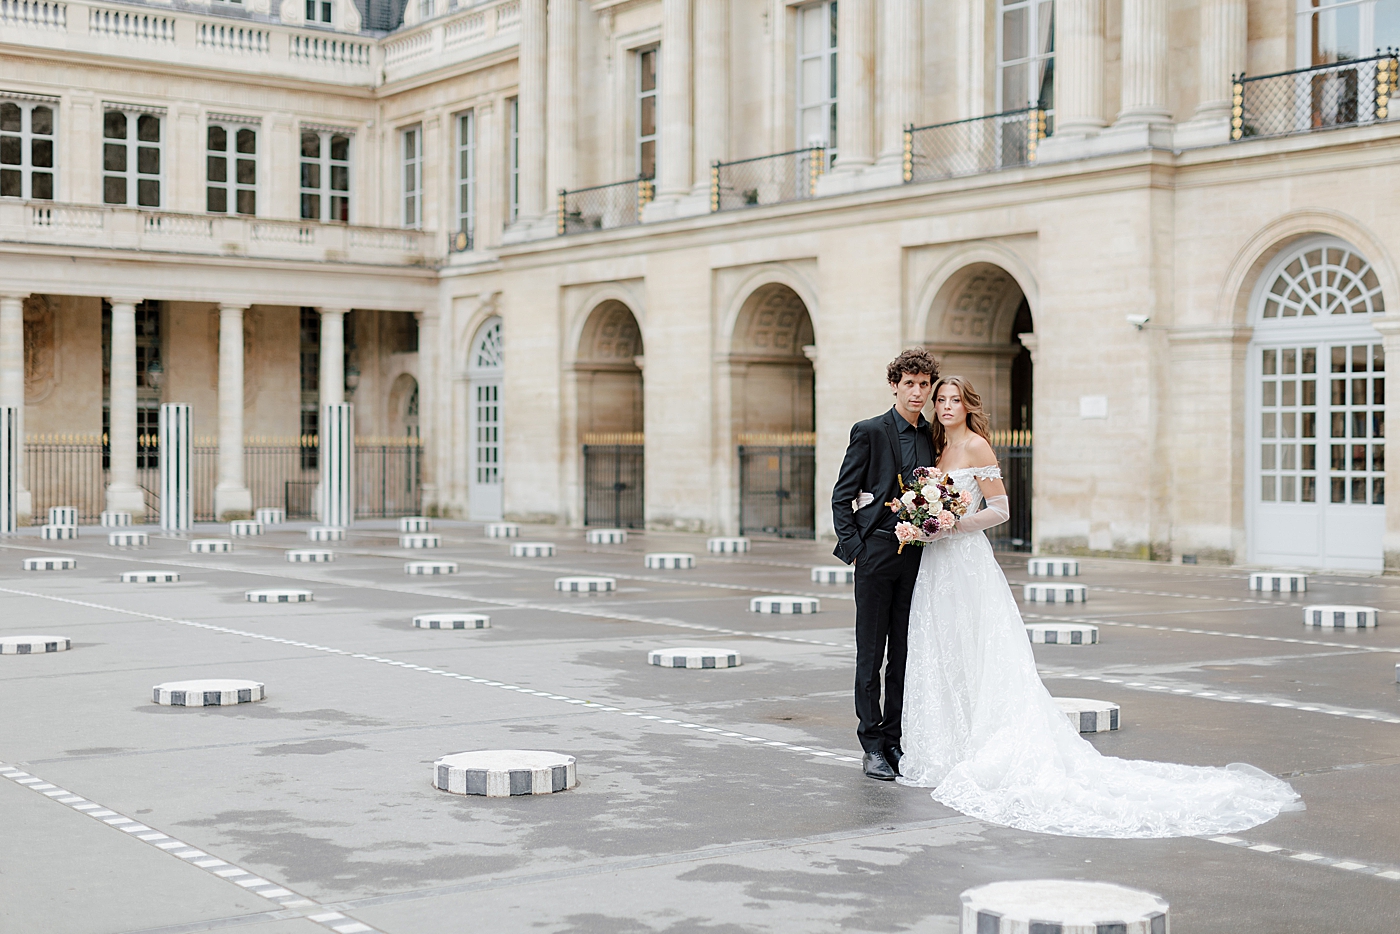 Image of a bride and groom embracing and looking at the camera with a European chateau in the background | Image by Hope Helmuth Photography